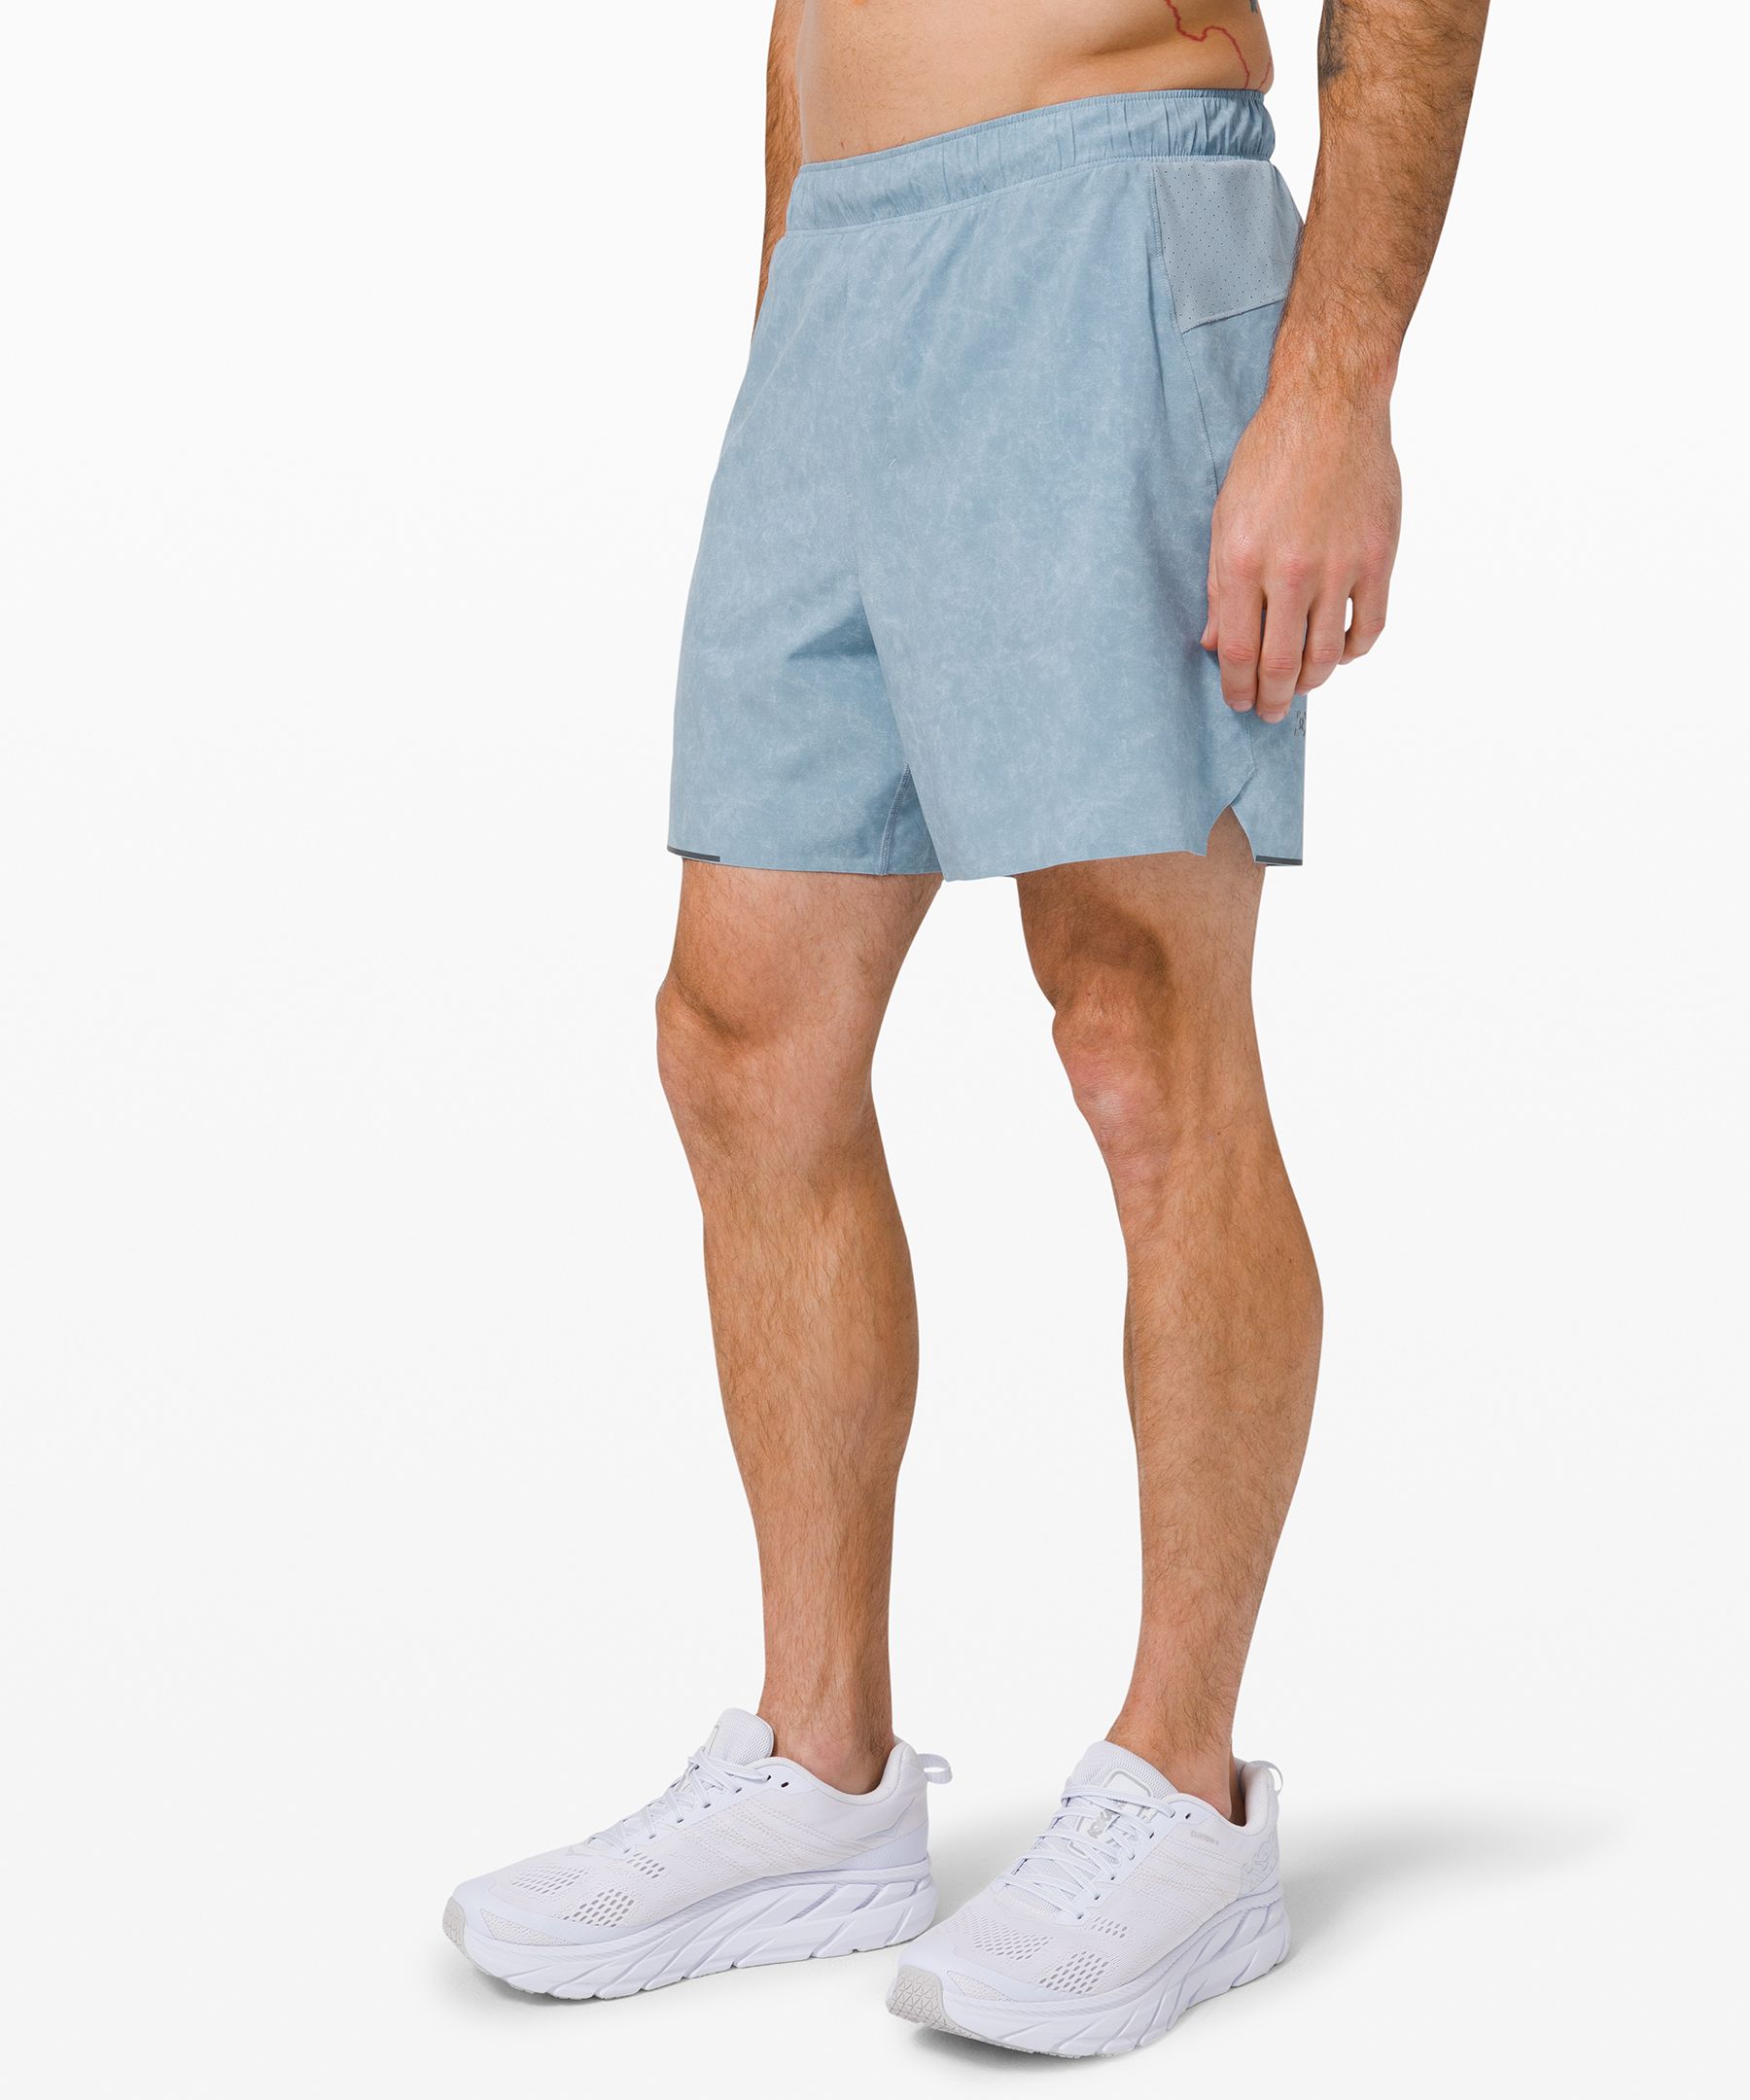 Lululemon Surge Lined Shorts 6" In Gravel Dust Chambray